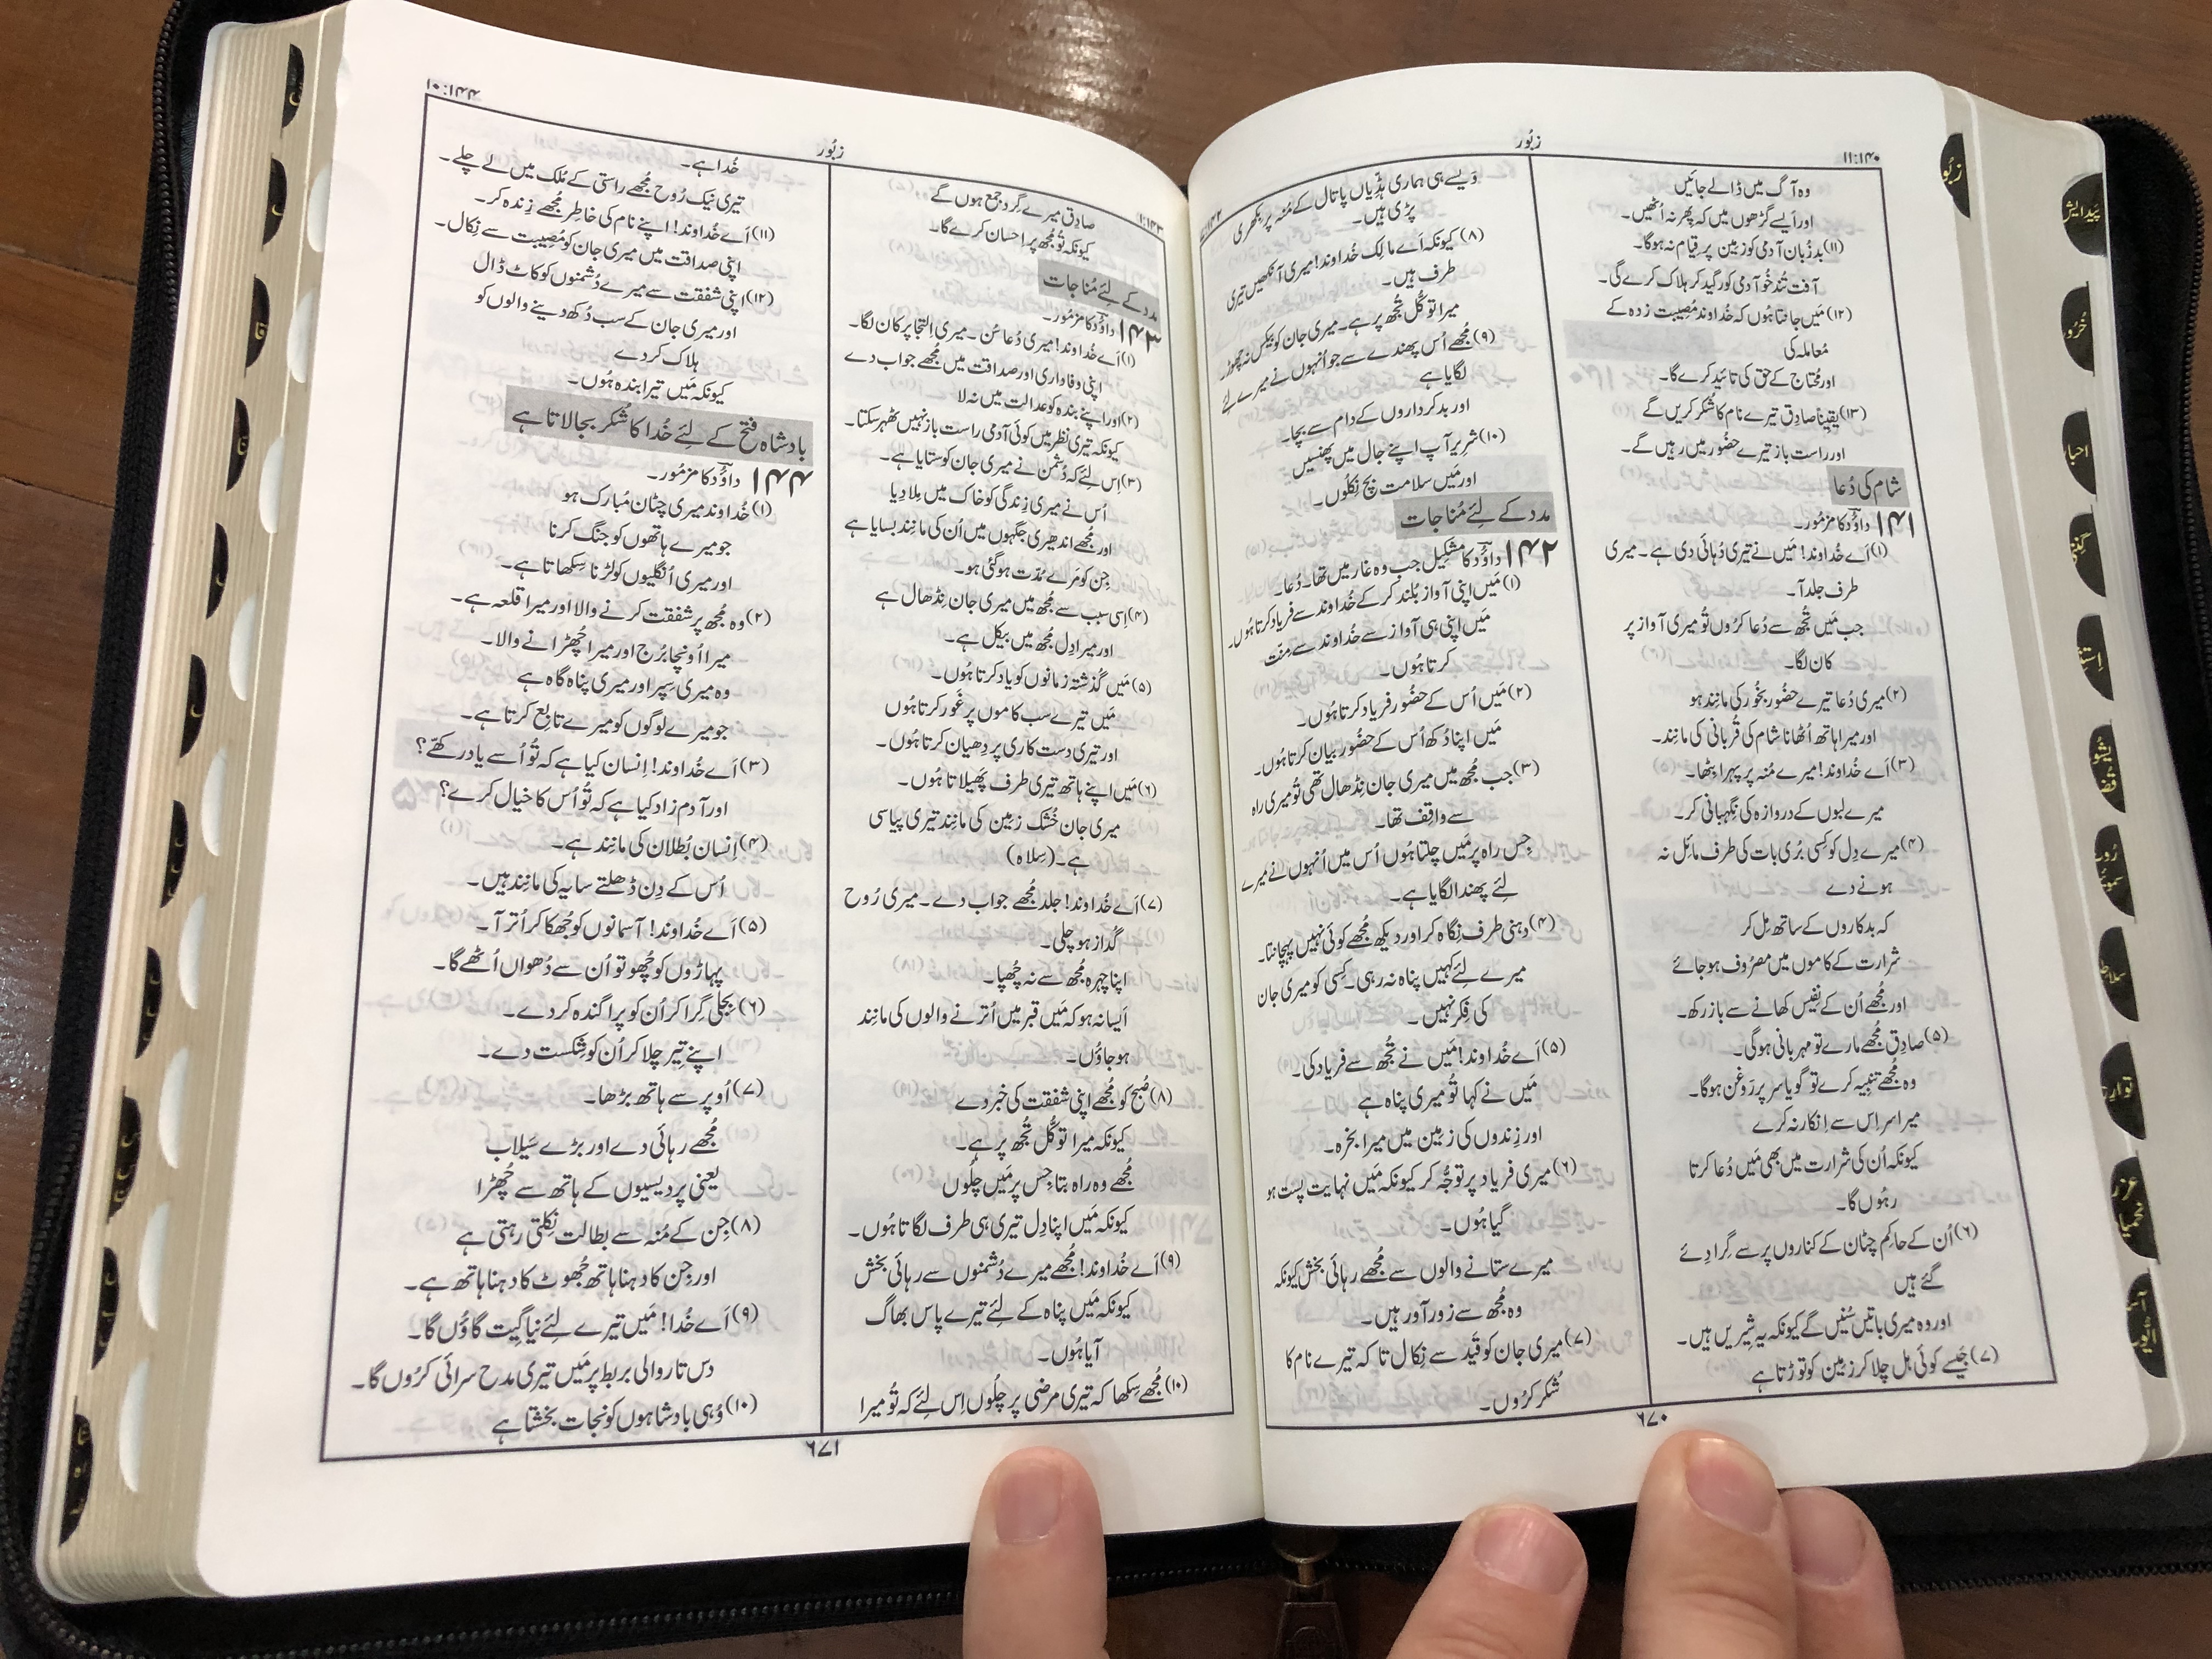 holy-bible-in-urdu-vinyl-pvc-bound-black-with-zipper-golden-edges-and-thumb-index-revised-version-pakistan-bible-society-2017-93p-series-17-.jpg